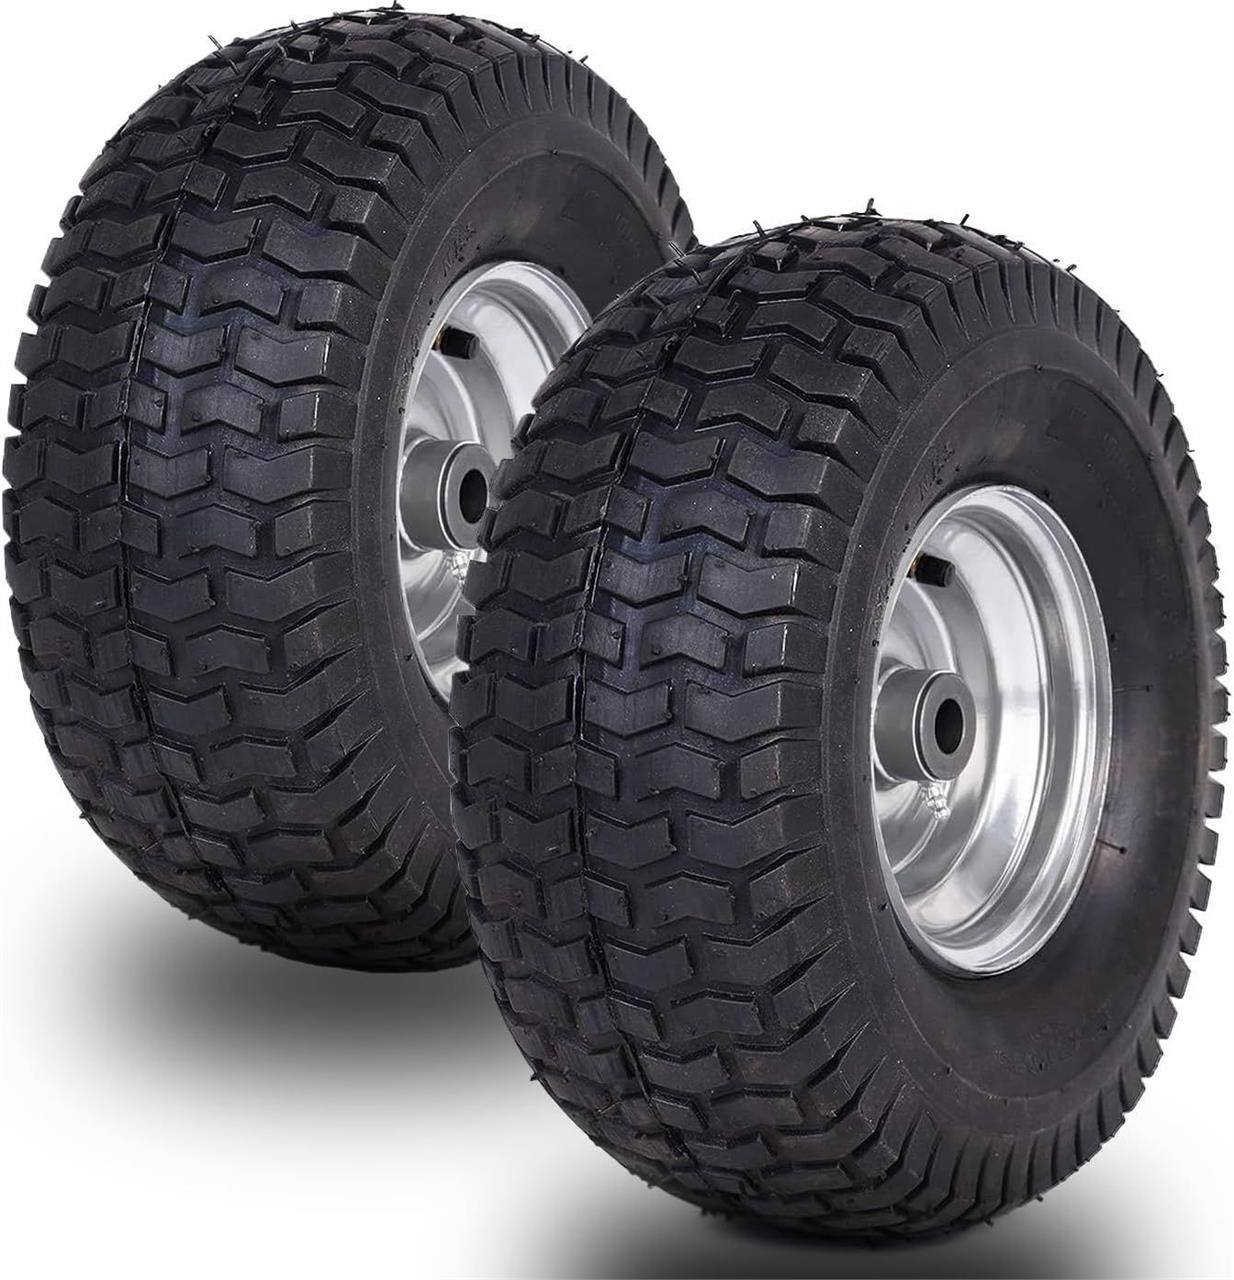 15x6.00-6 Lawn Mower Tire and Wheel Set